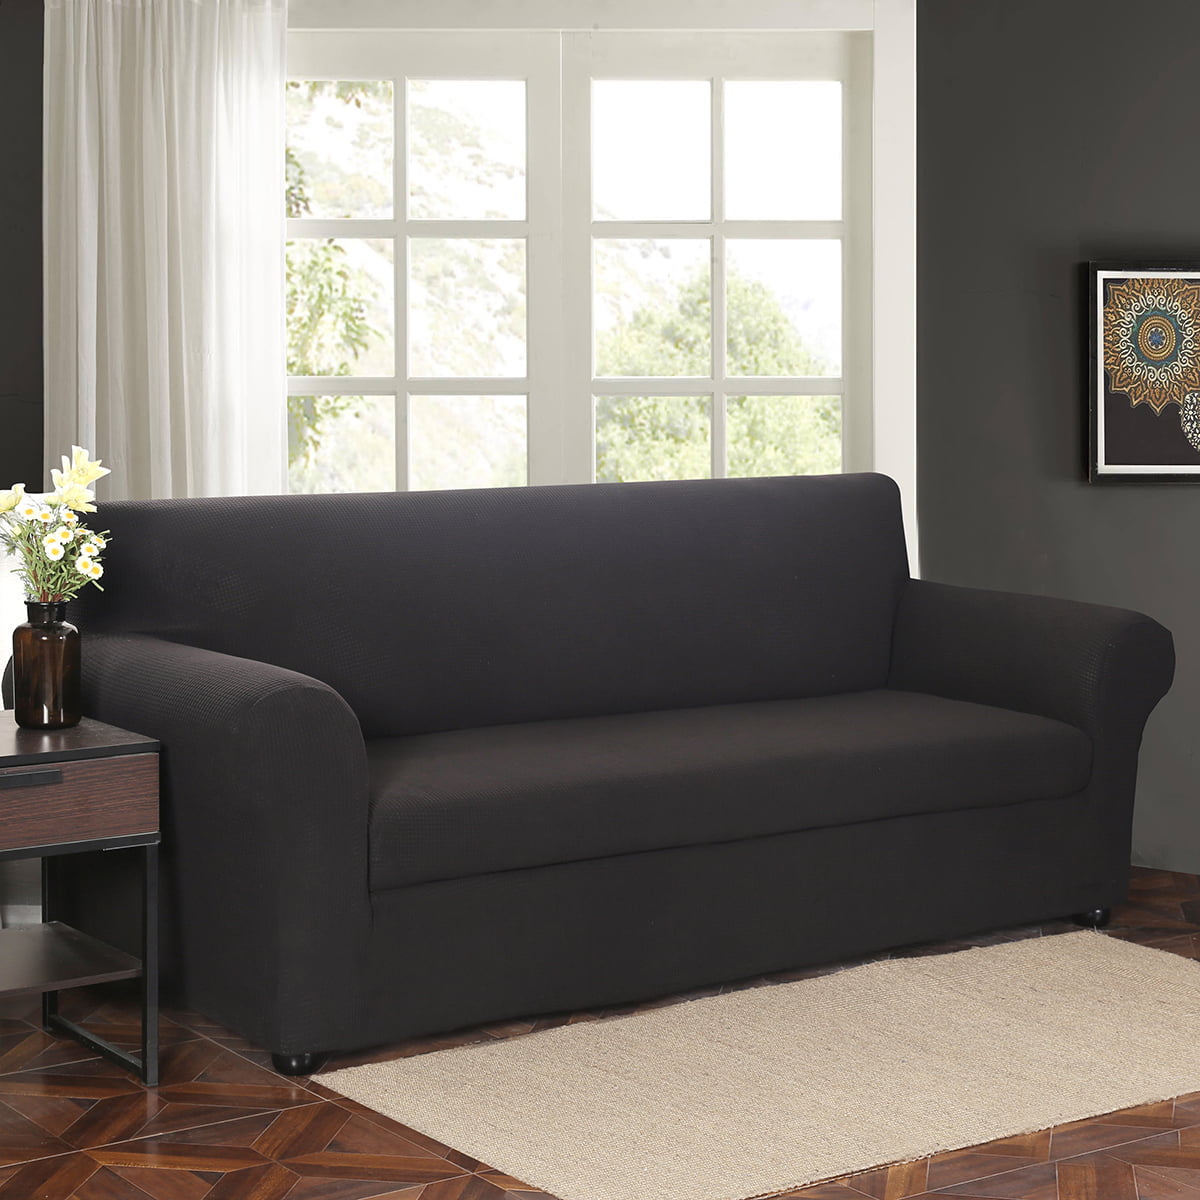 Details about   1-4 Seater Waterproof Non-slip  Elastic Slipcovers for Living Room Couch Covers 